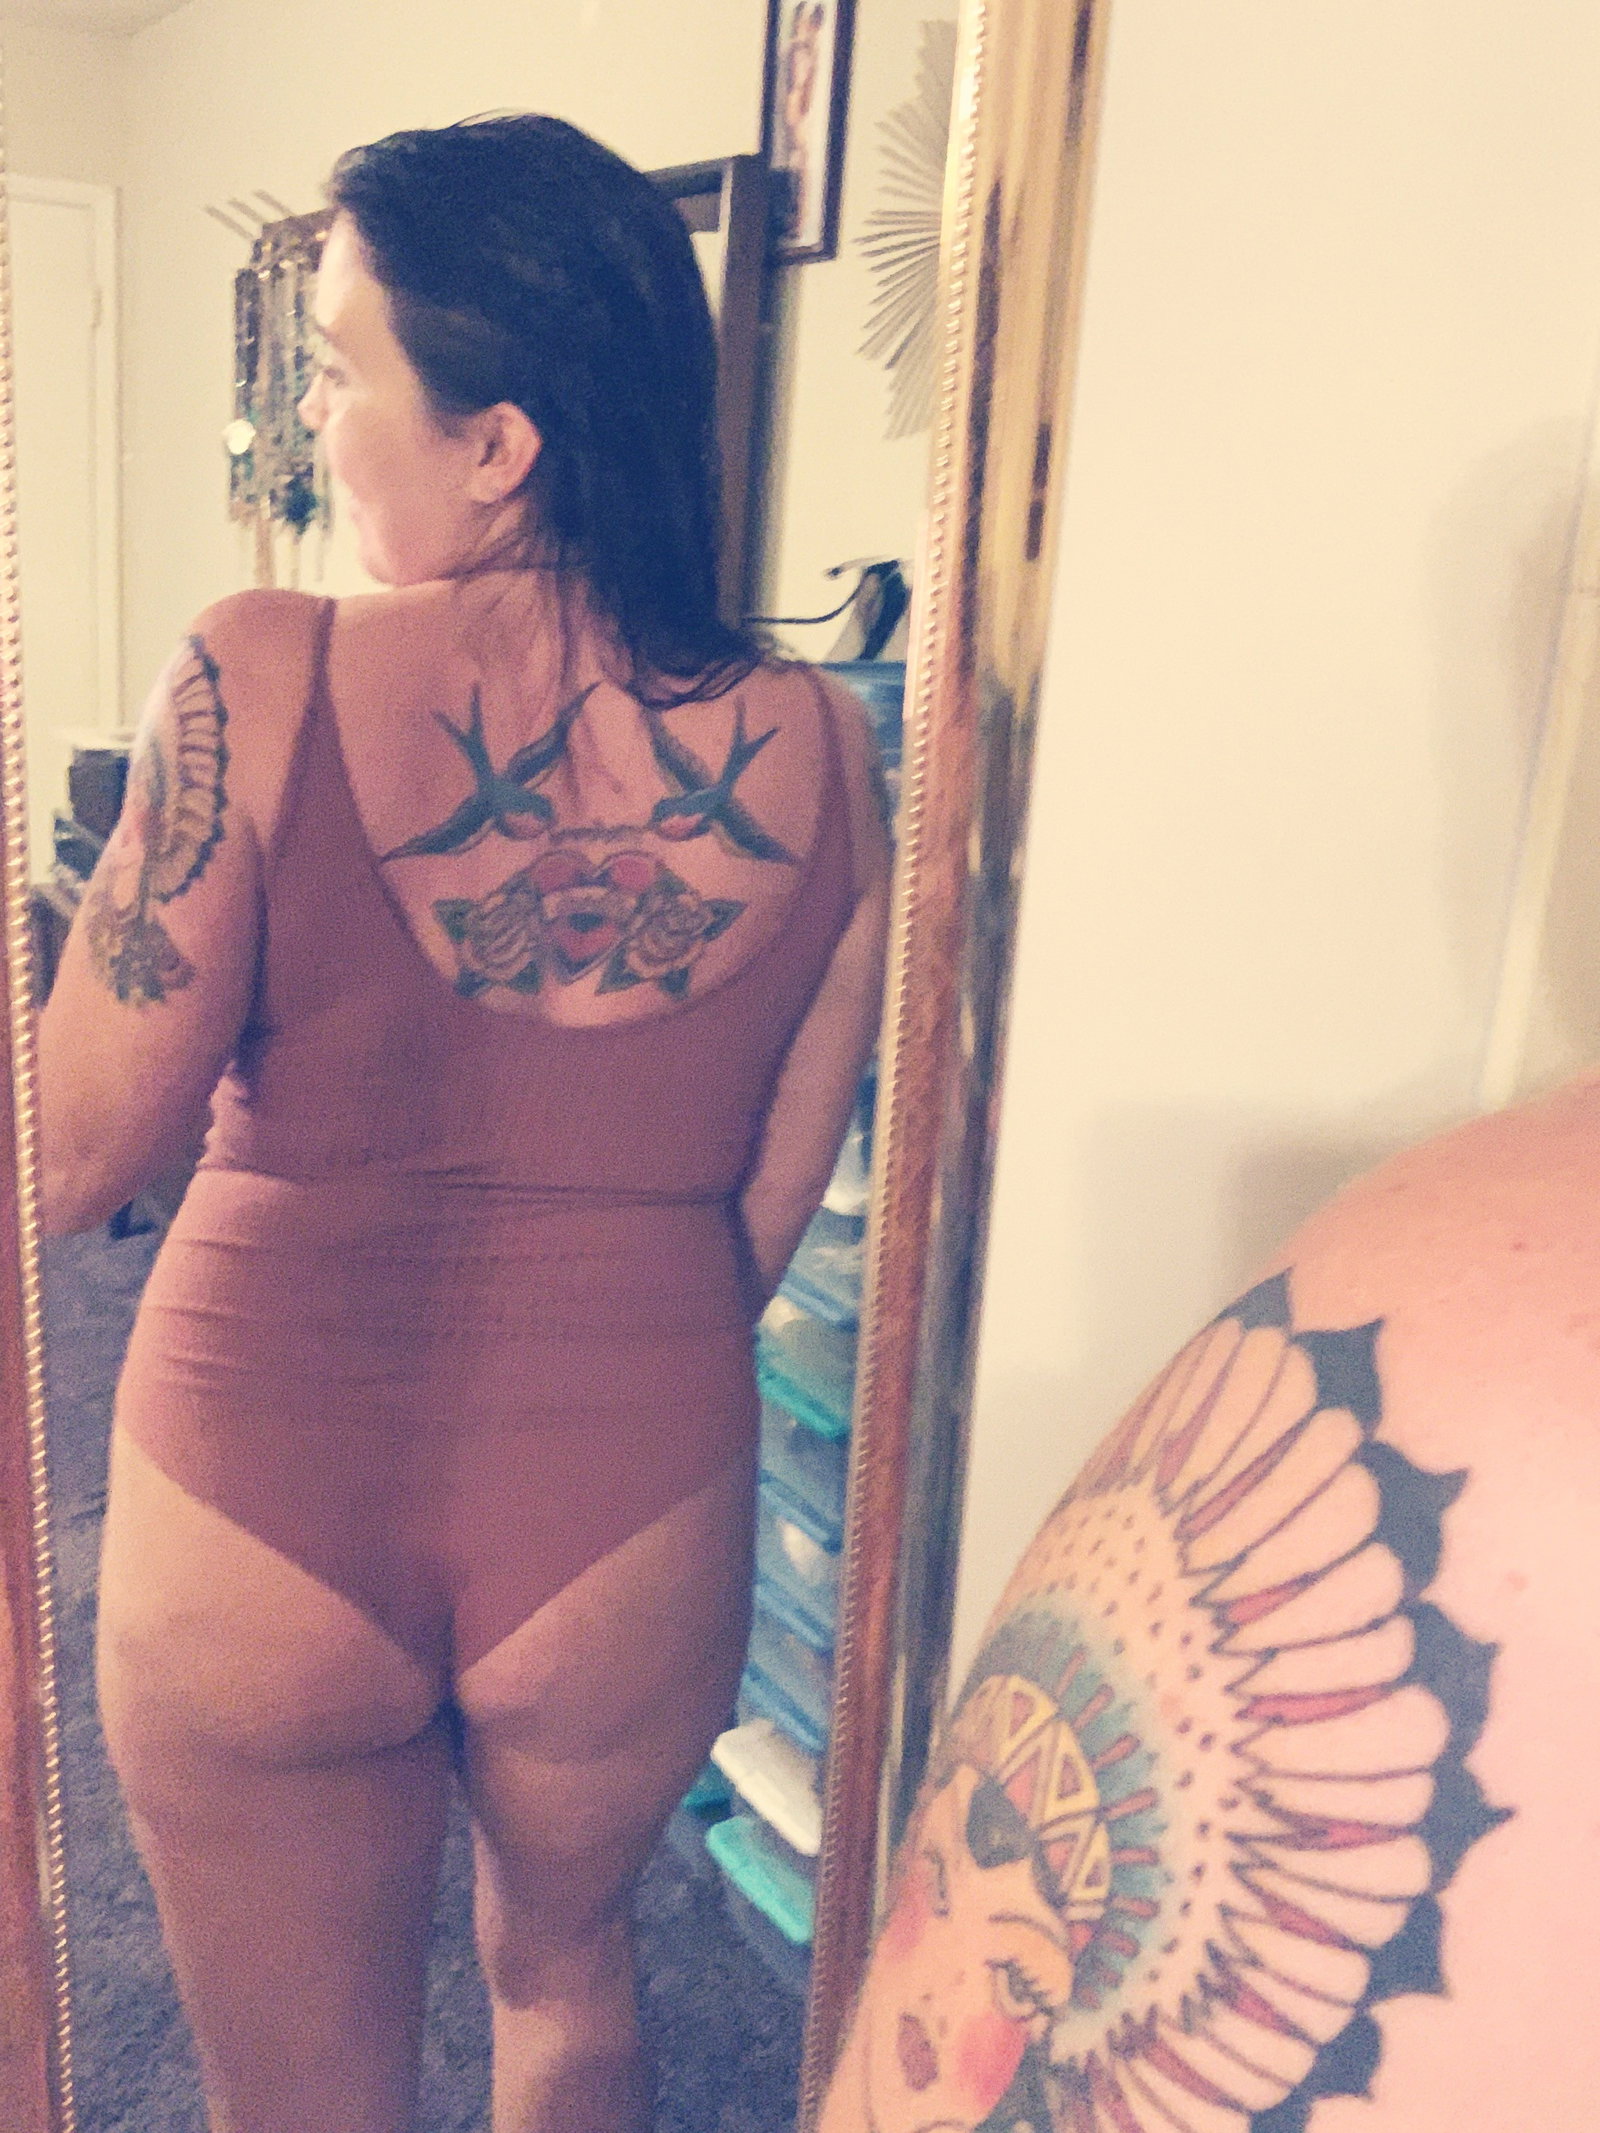 Photo by Denise La Fleur with the username @deniselafleur, who is a star user,  March 14, 2019 at 9:10 PM. The post is about the topic Amateurs and the text says 'It’s thong Thursday, peeps, and bodysuit weather on the gulf coast...YUMMMY!!” #vintagevibes #buttcheeksandcleavage #goldenhuesgoldenglow #pinupmodel #realwomenwithrealbodies'